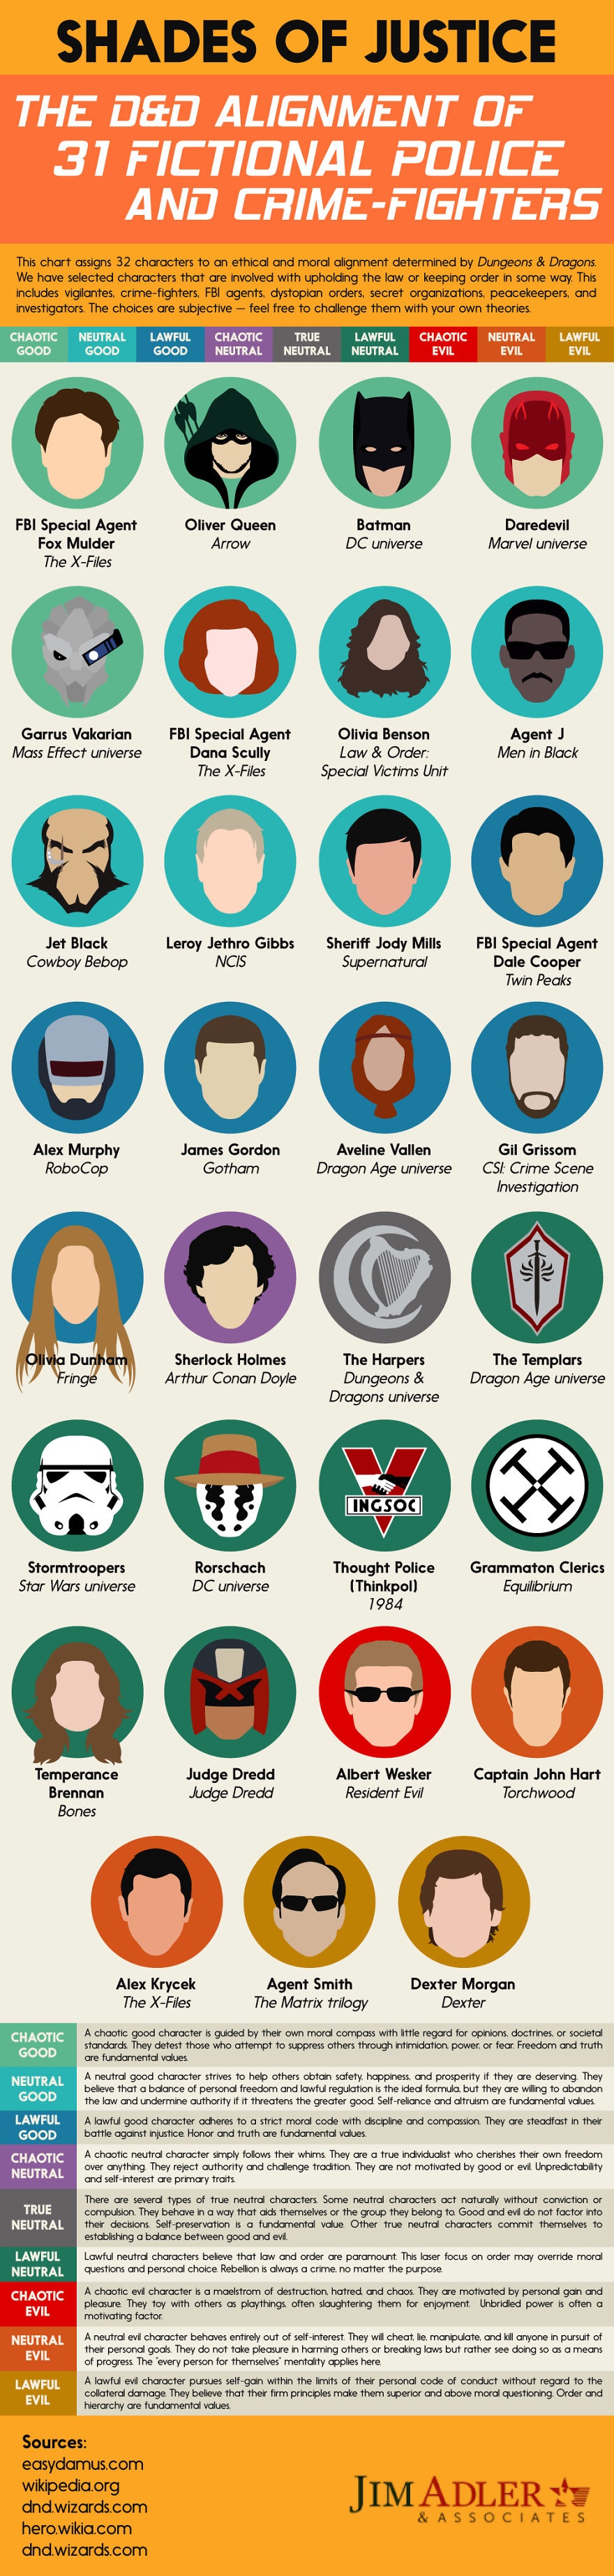 Shades Of Justice: The D&d Alignment Of 31 Fictional Police And Crime-fighters